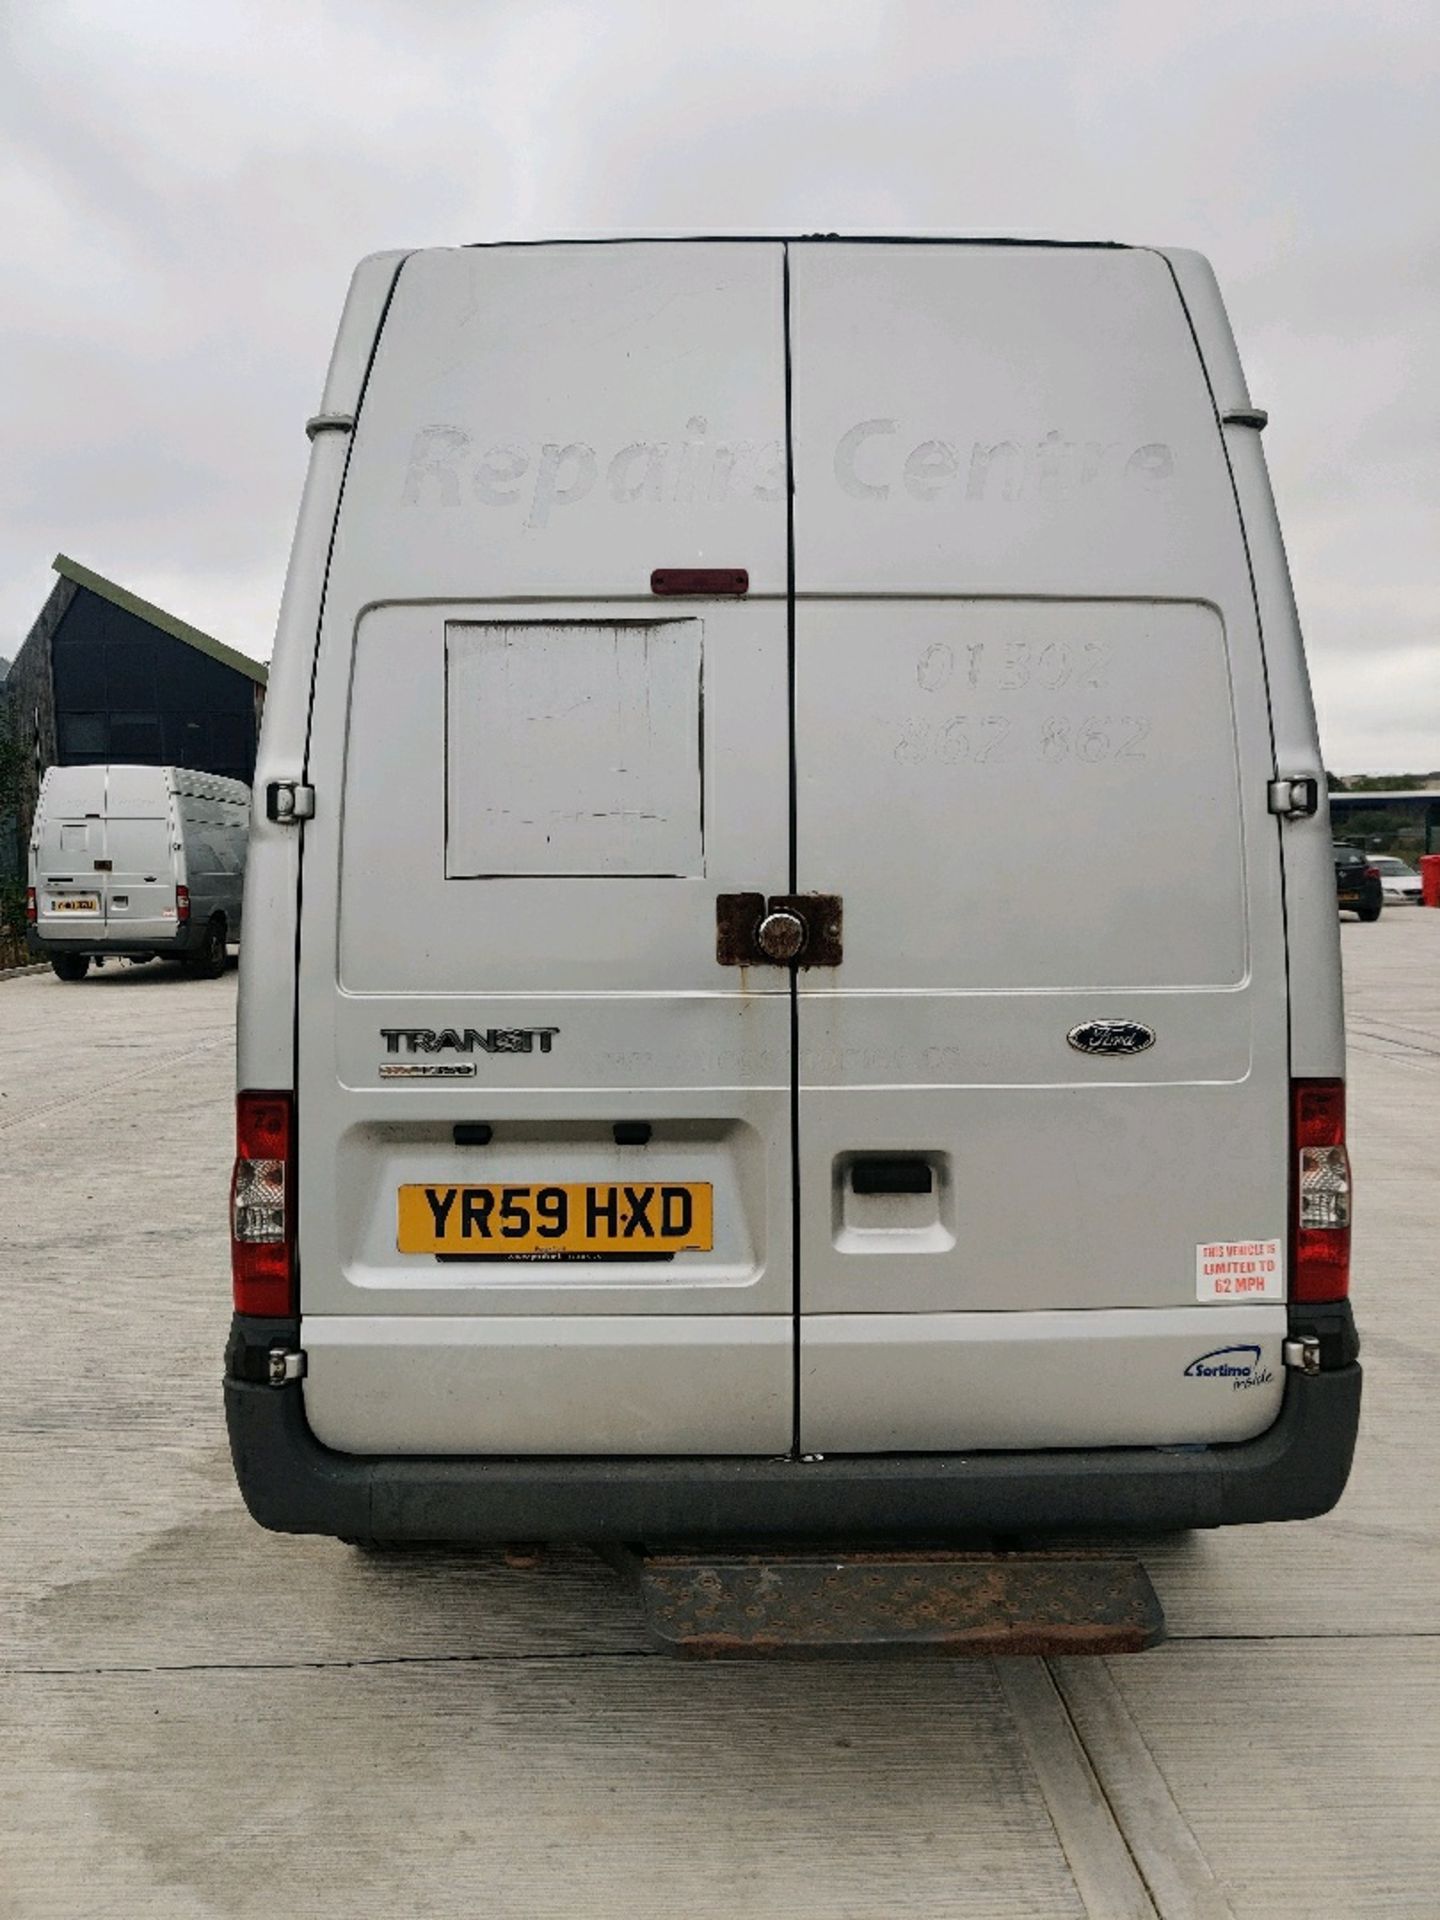 ENTRY DIRECT FROM LOCAL AUTHORITY Ford transit YR59HXD - Image 3 of 21